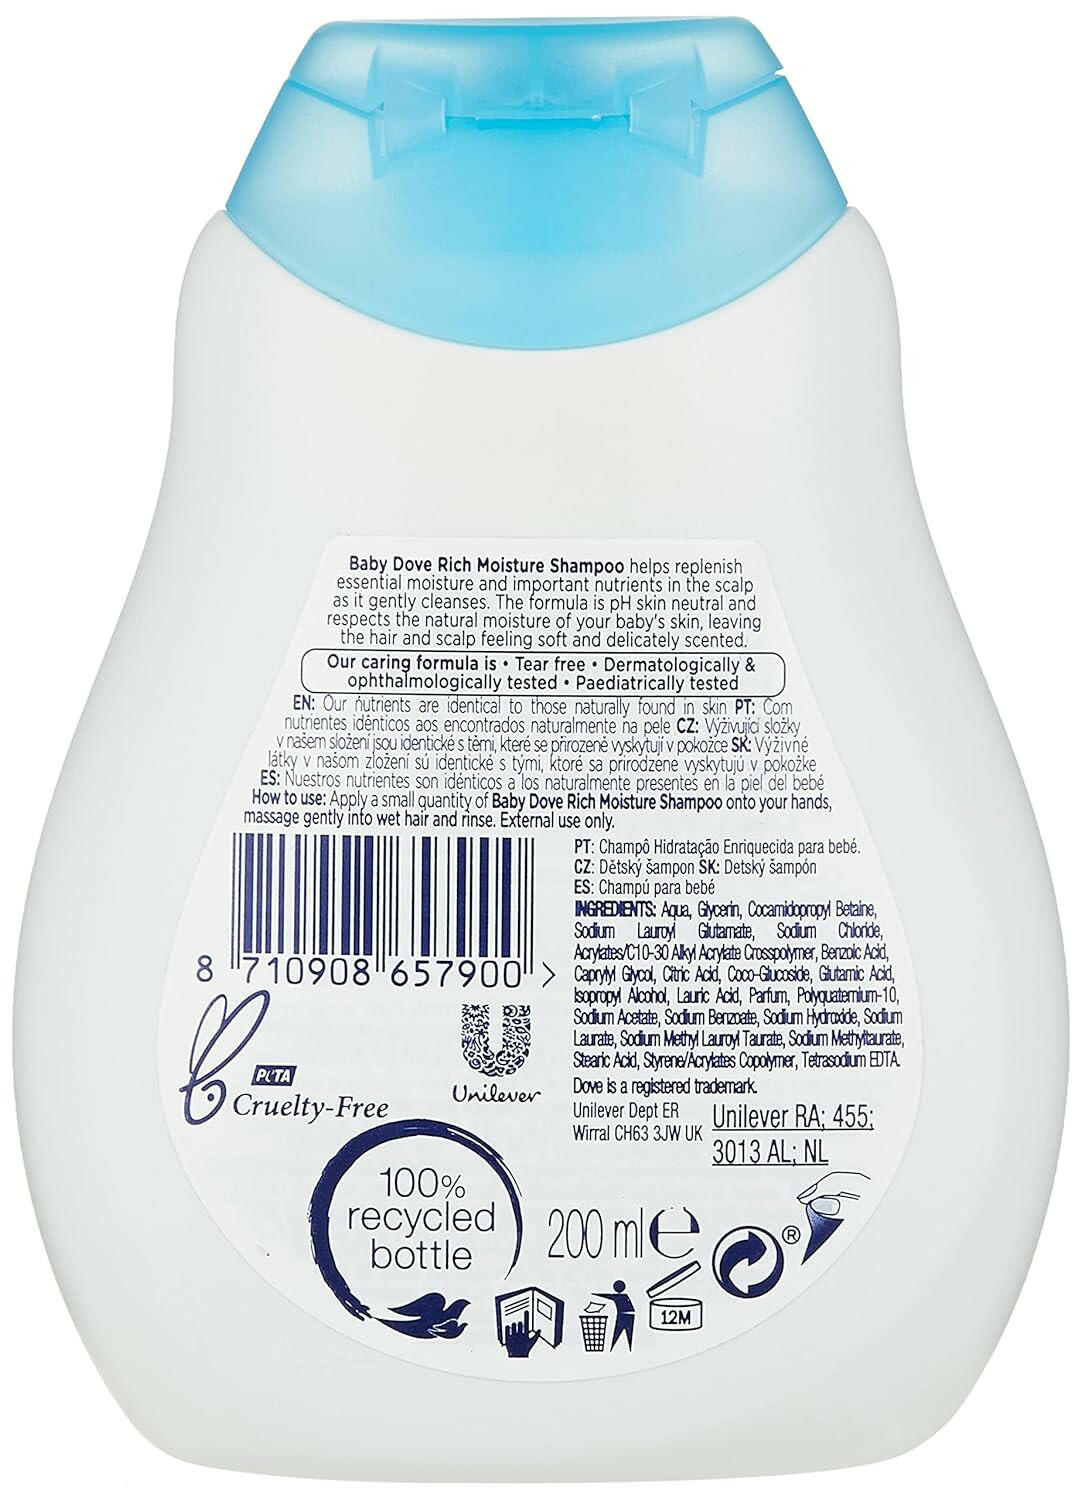 Swan Rubbing Alcohol, Isopropyl, 70%, with Wintergreen and Glycerin - 16 fl oz